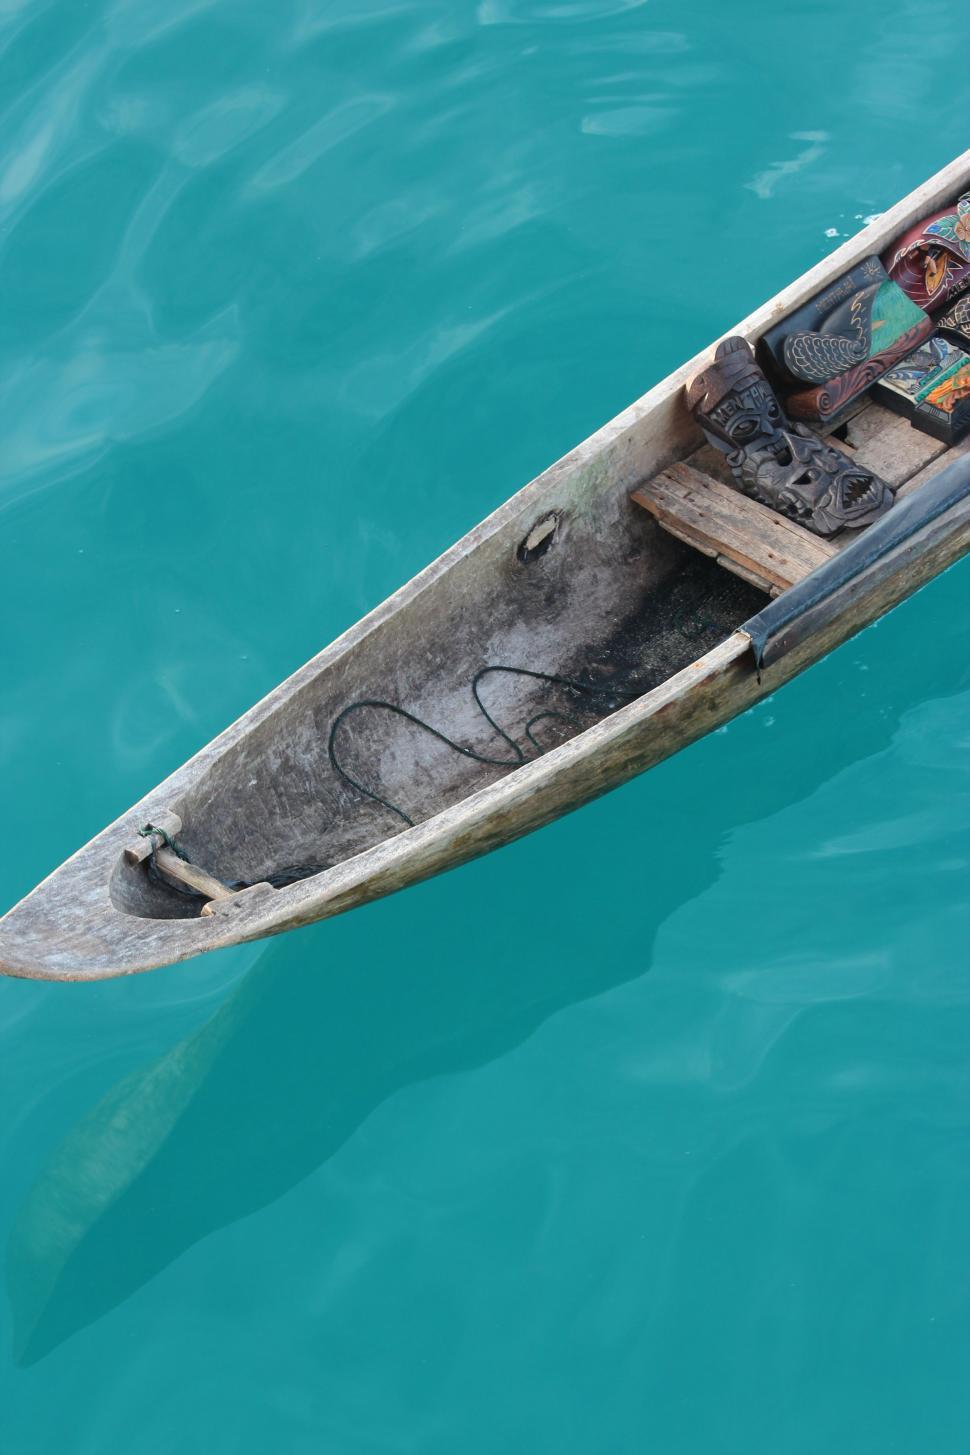 Free Image of Small Boat Floating on a Body of Water 